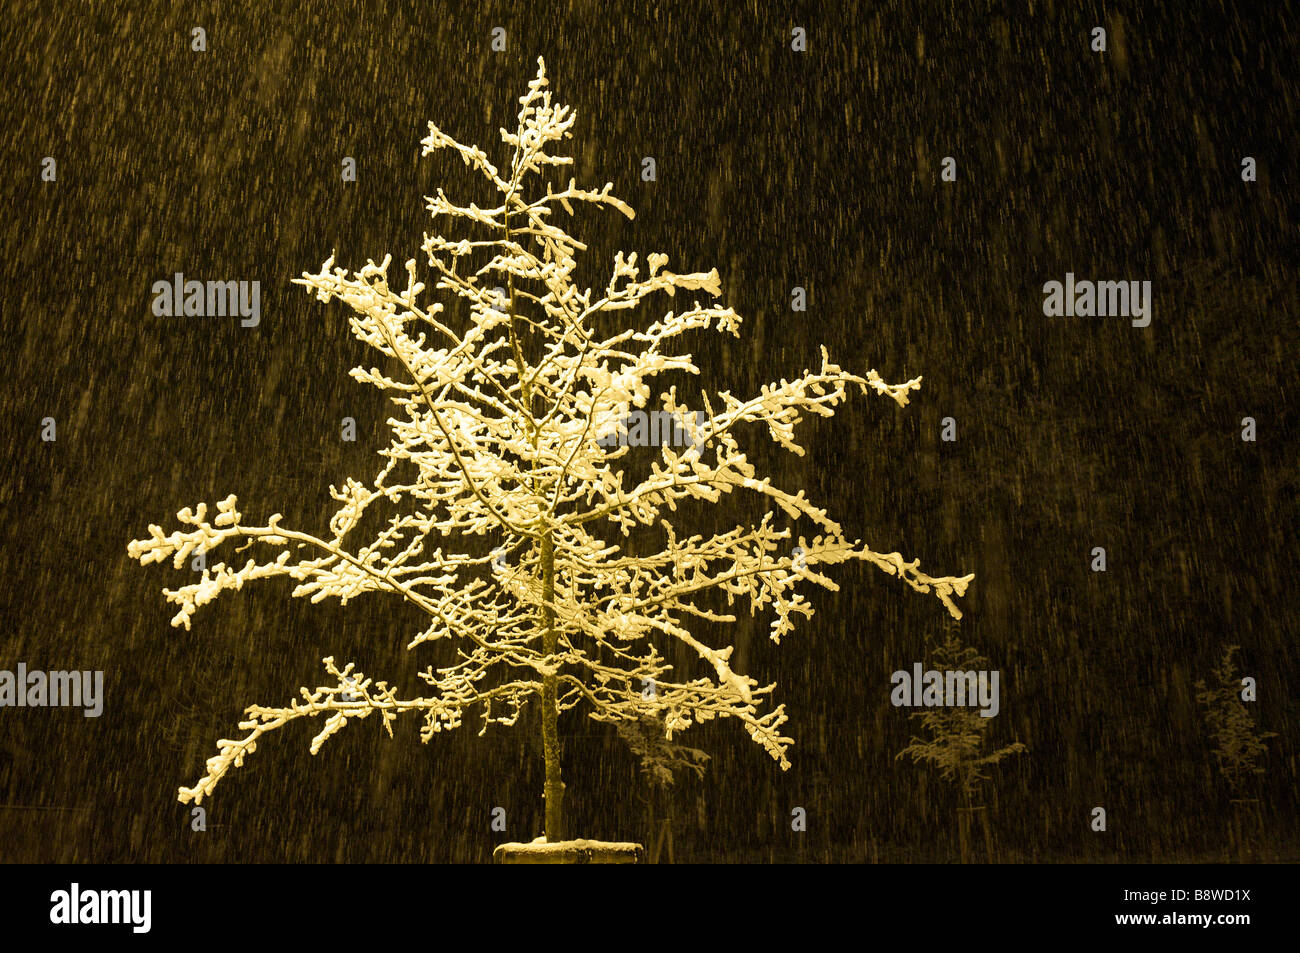 Snow on a tree. Image taken at night, snow is falling Stock Photo